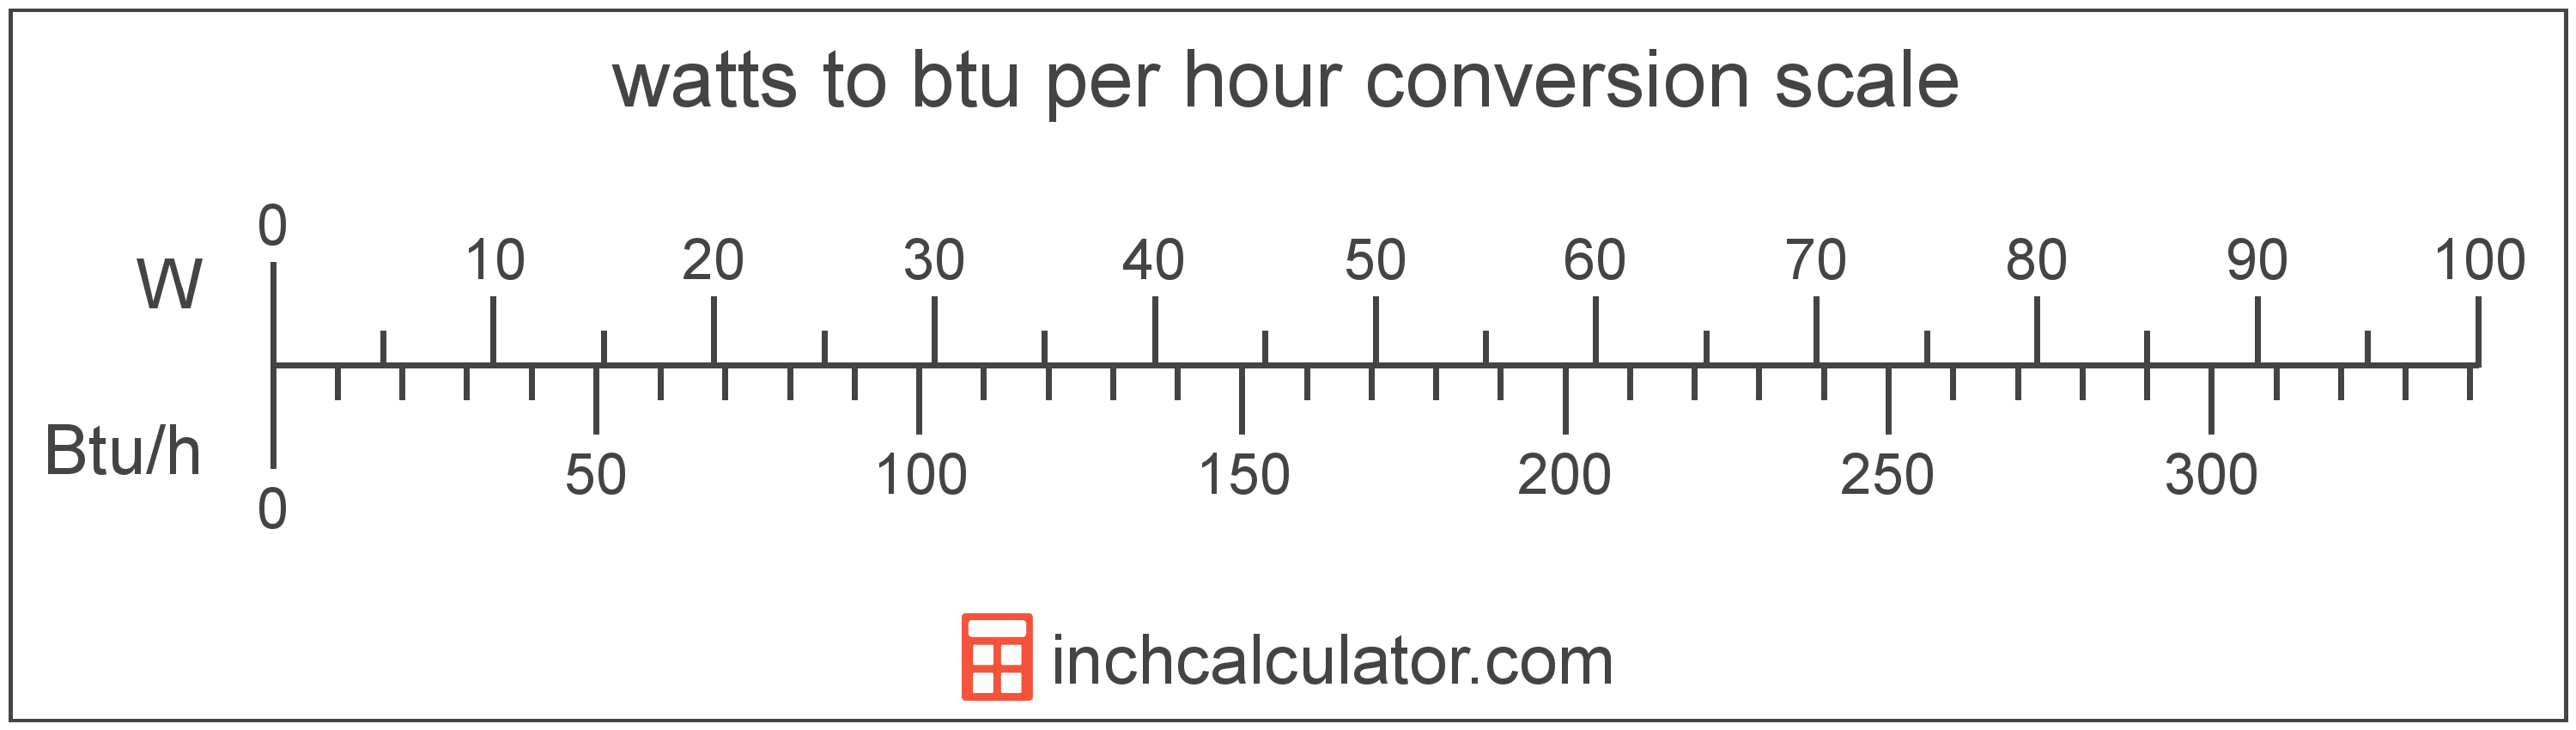 conversion scale showing watts and equivalent btu per hour power values